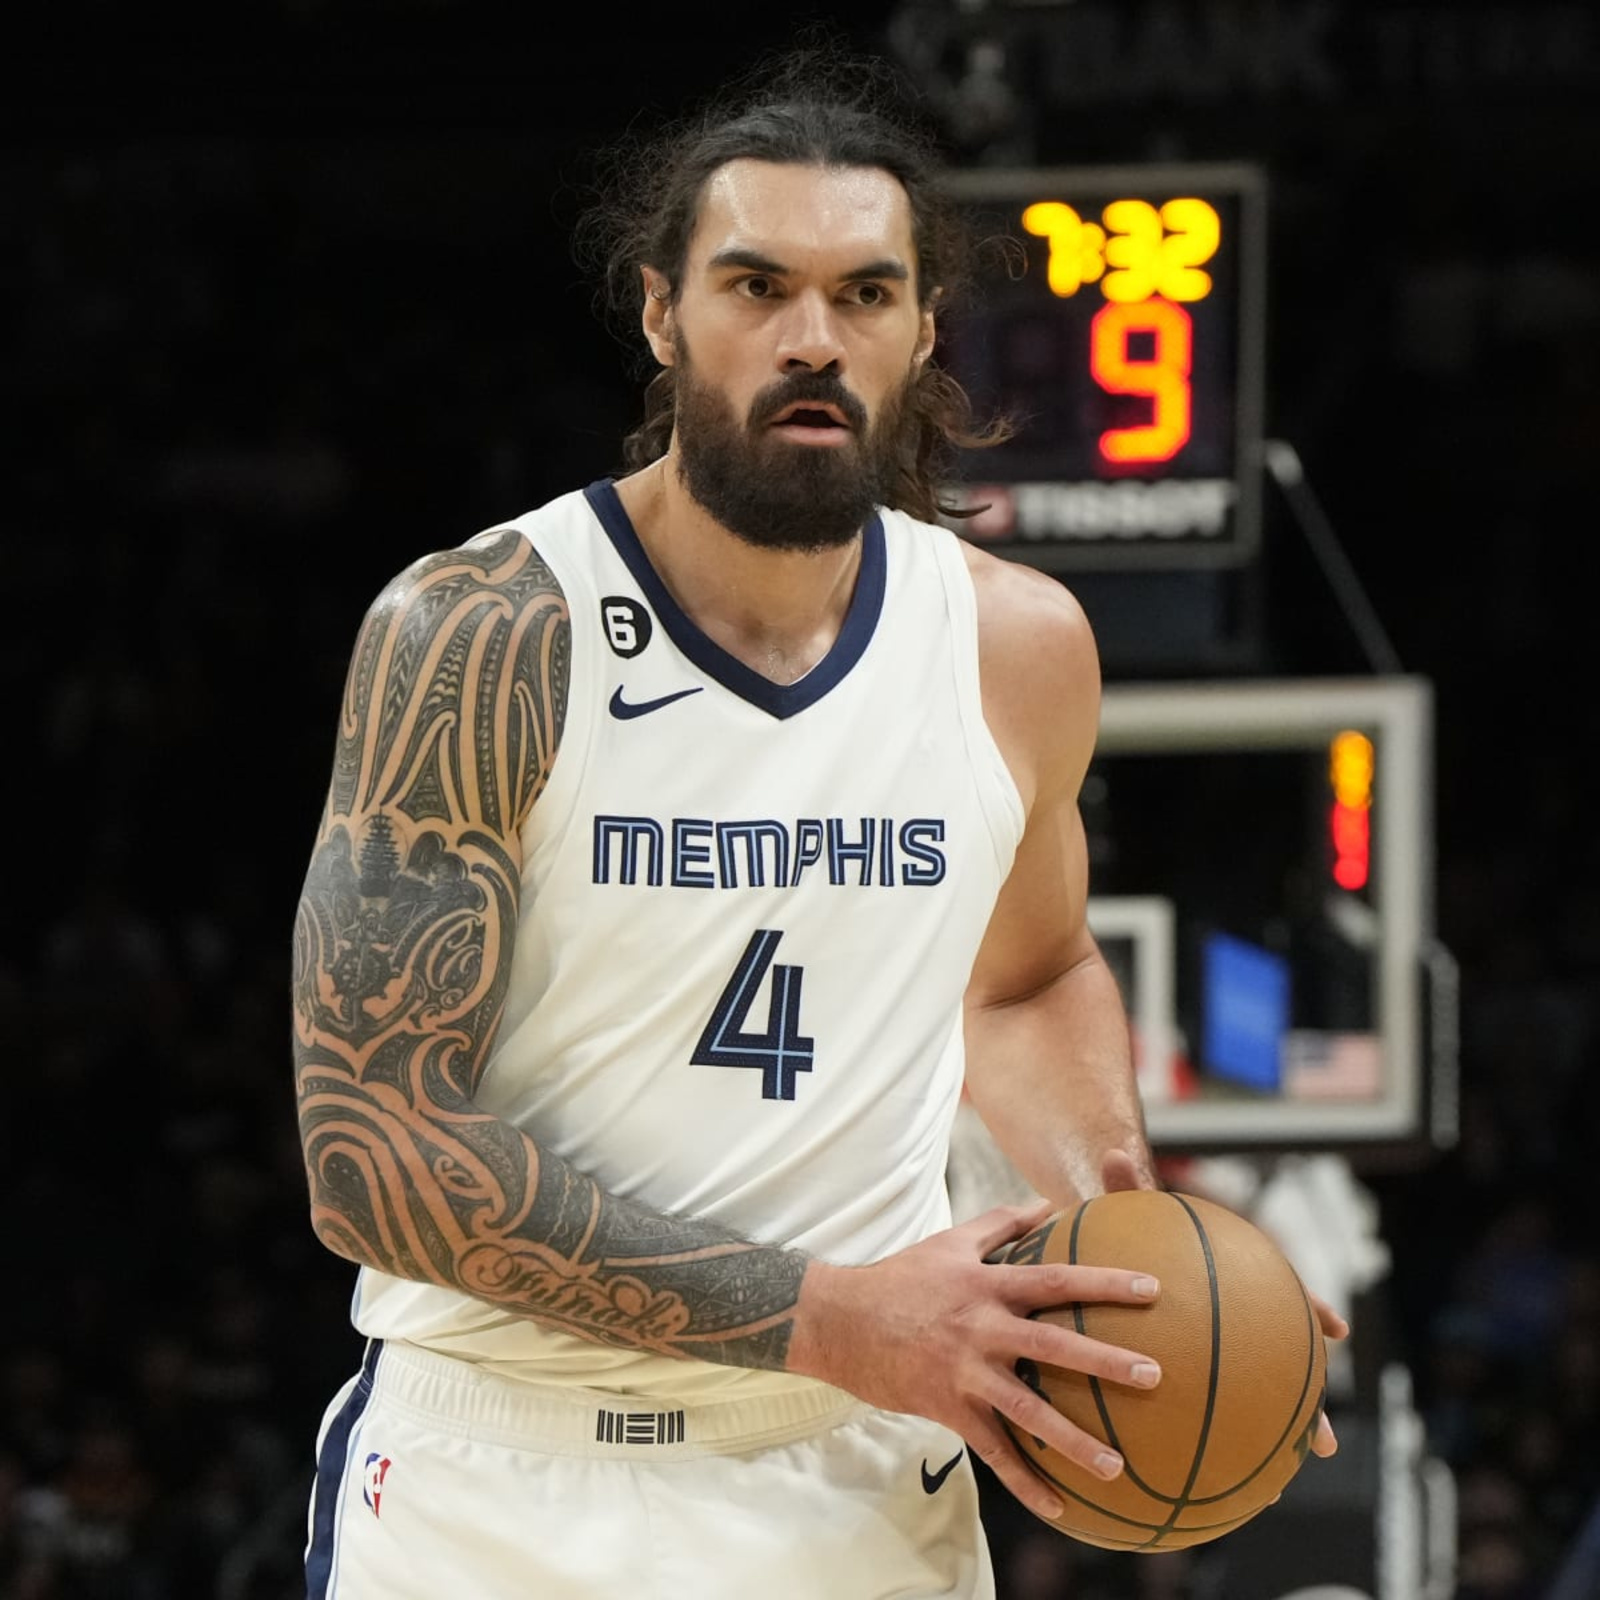 NBA: Grizzlies' Adams out for season with knee injury